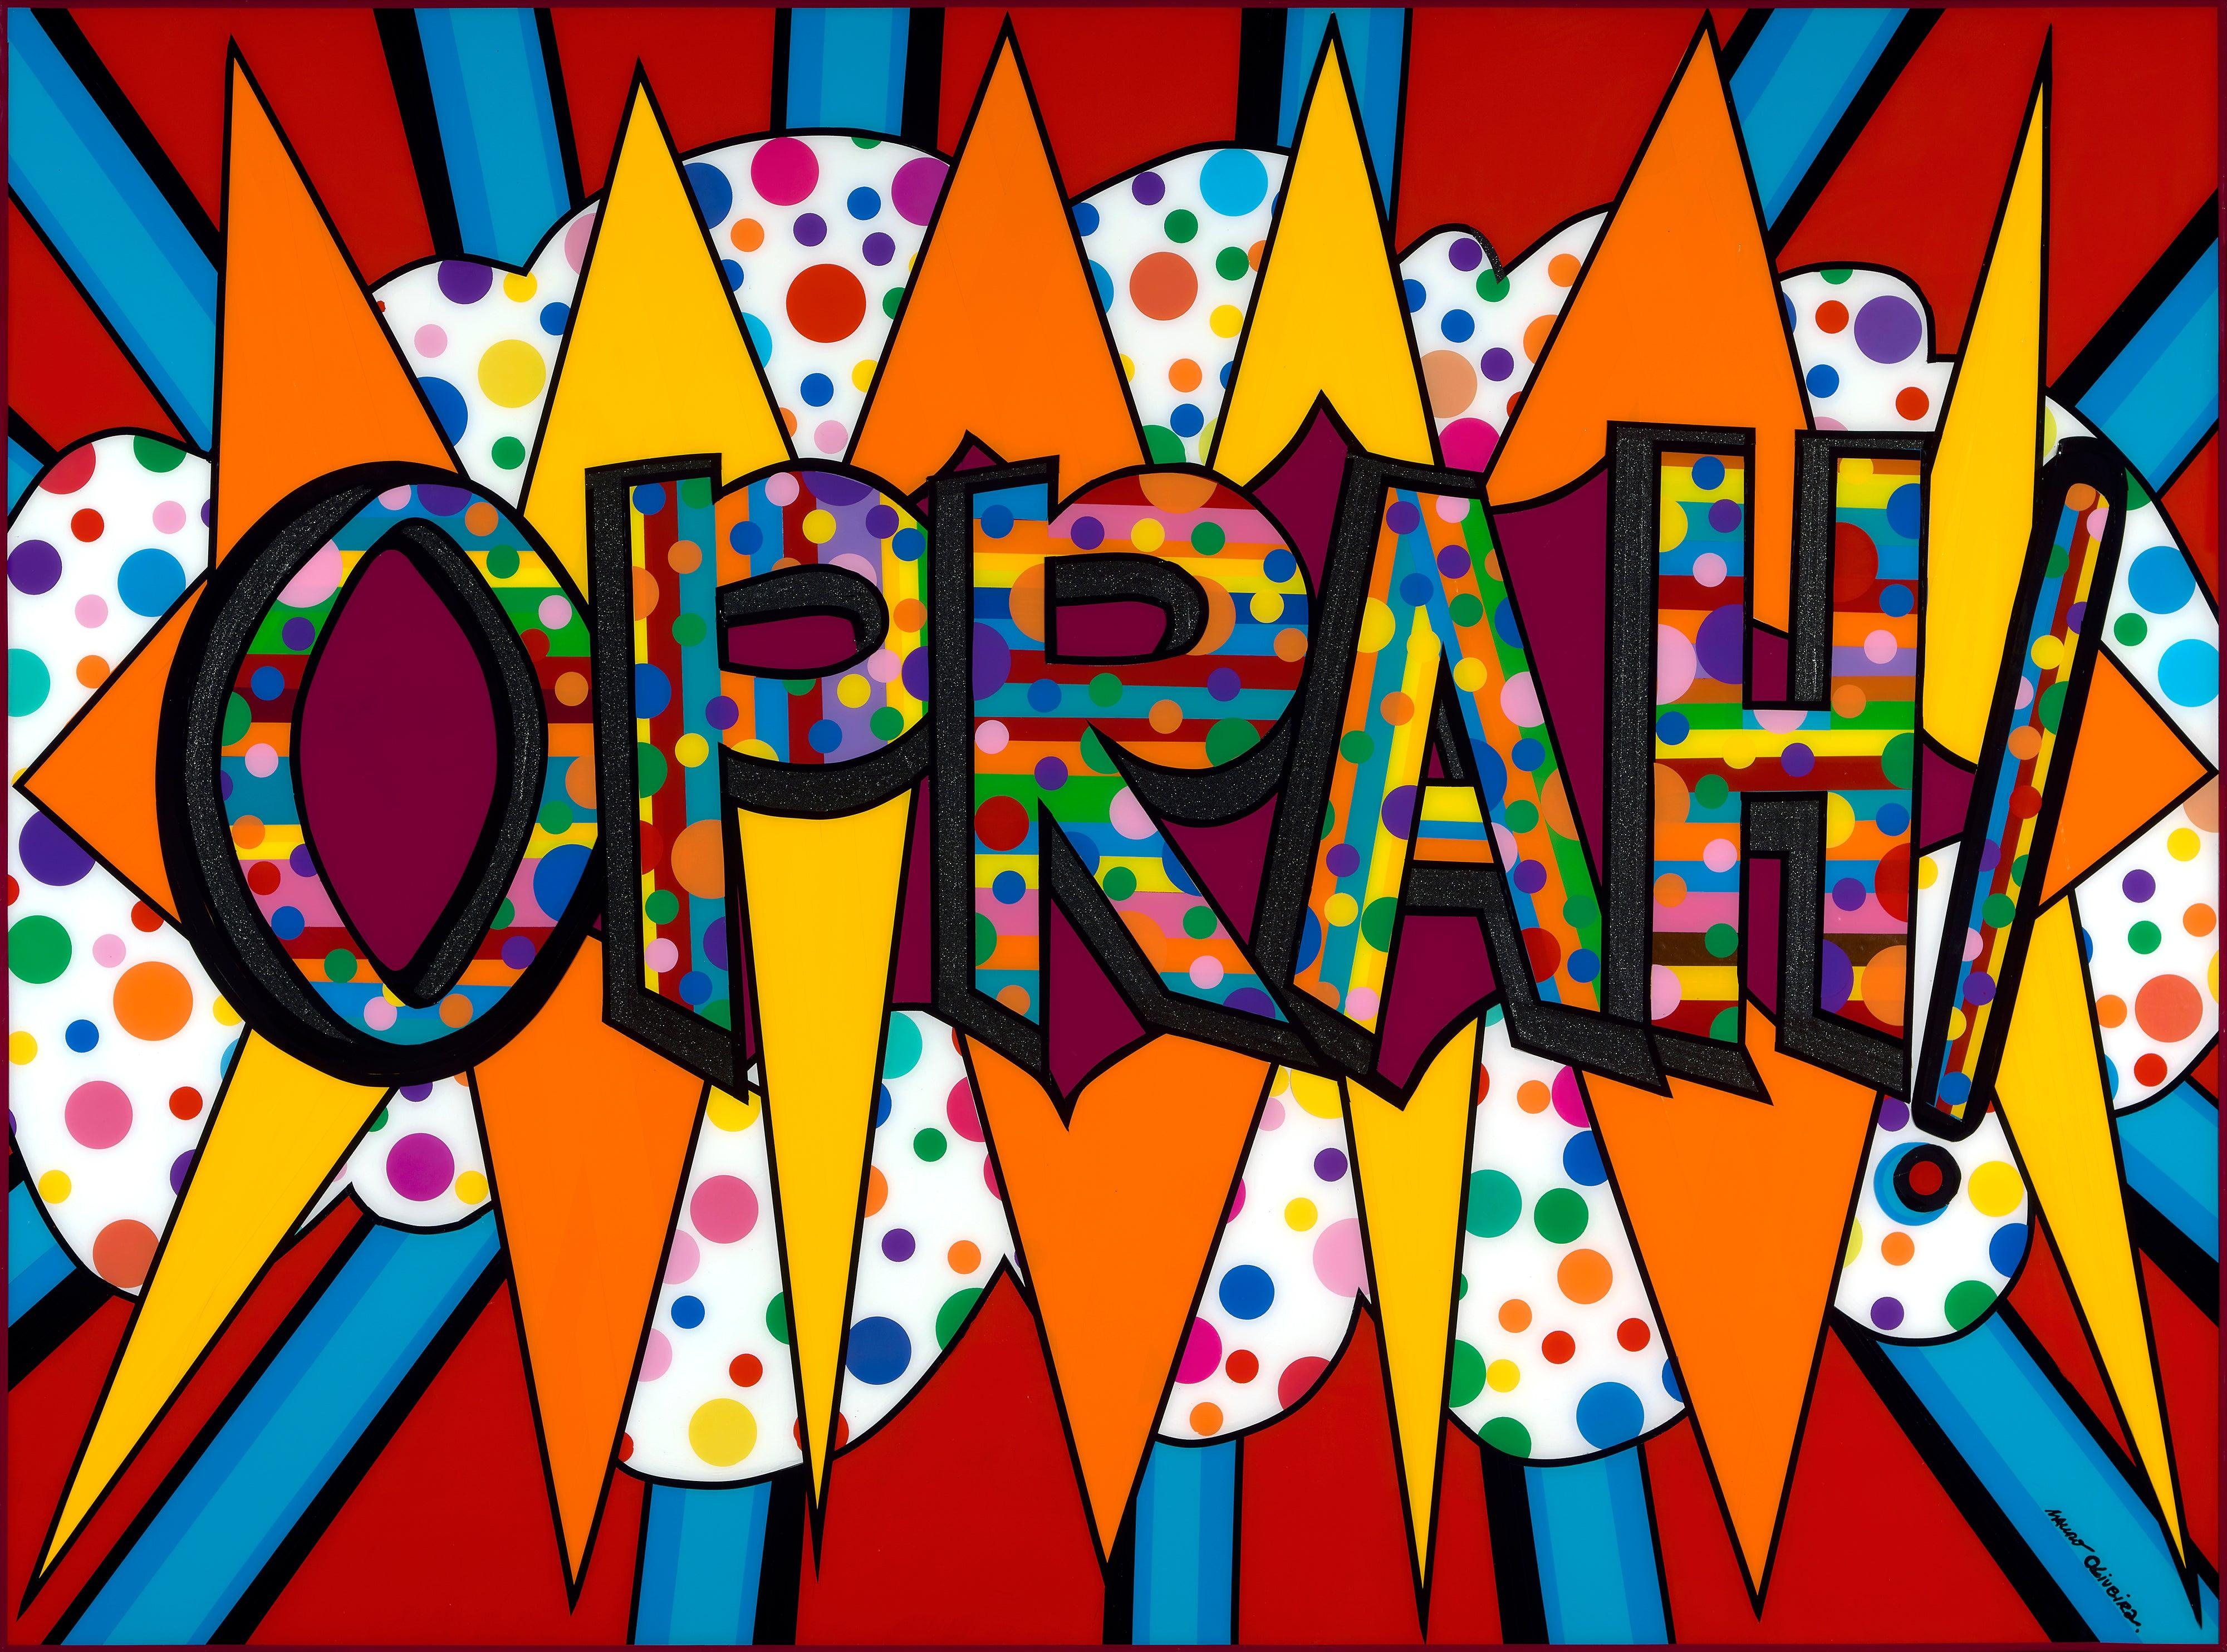 **ANNUAL SUPER SALE UNTIL MAY 15TH ONLY**
THIS PRICE WON'T BE REPEATED AGAIN THIS YEAR - TAKE ADVANTAGE OF IT**

Celebrating Oprah with this unique series by Mauro Oliveira. The colorful approach represents all the people Oprah has touched